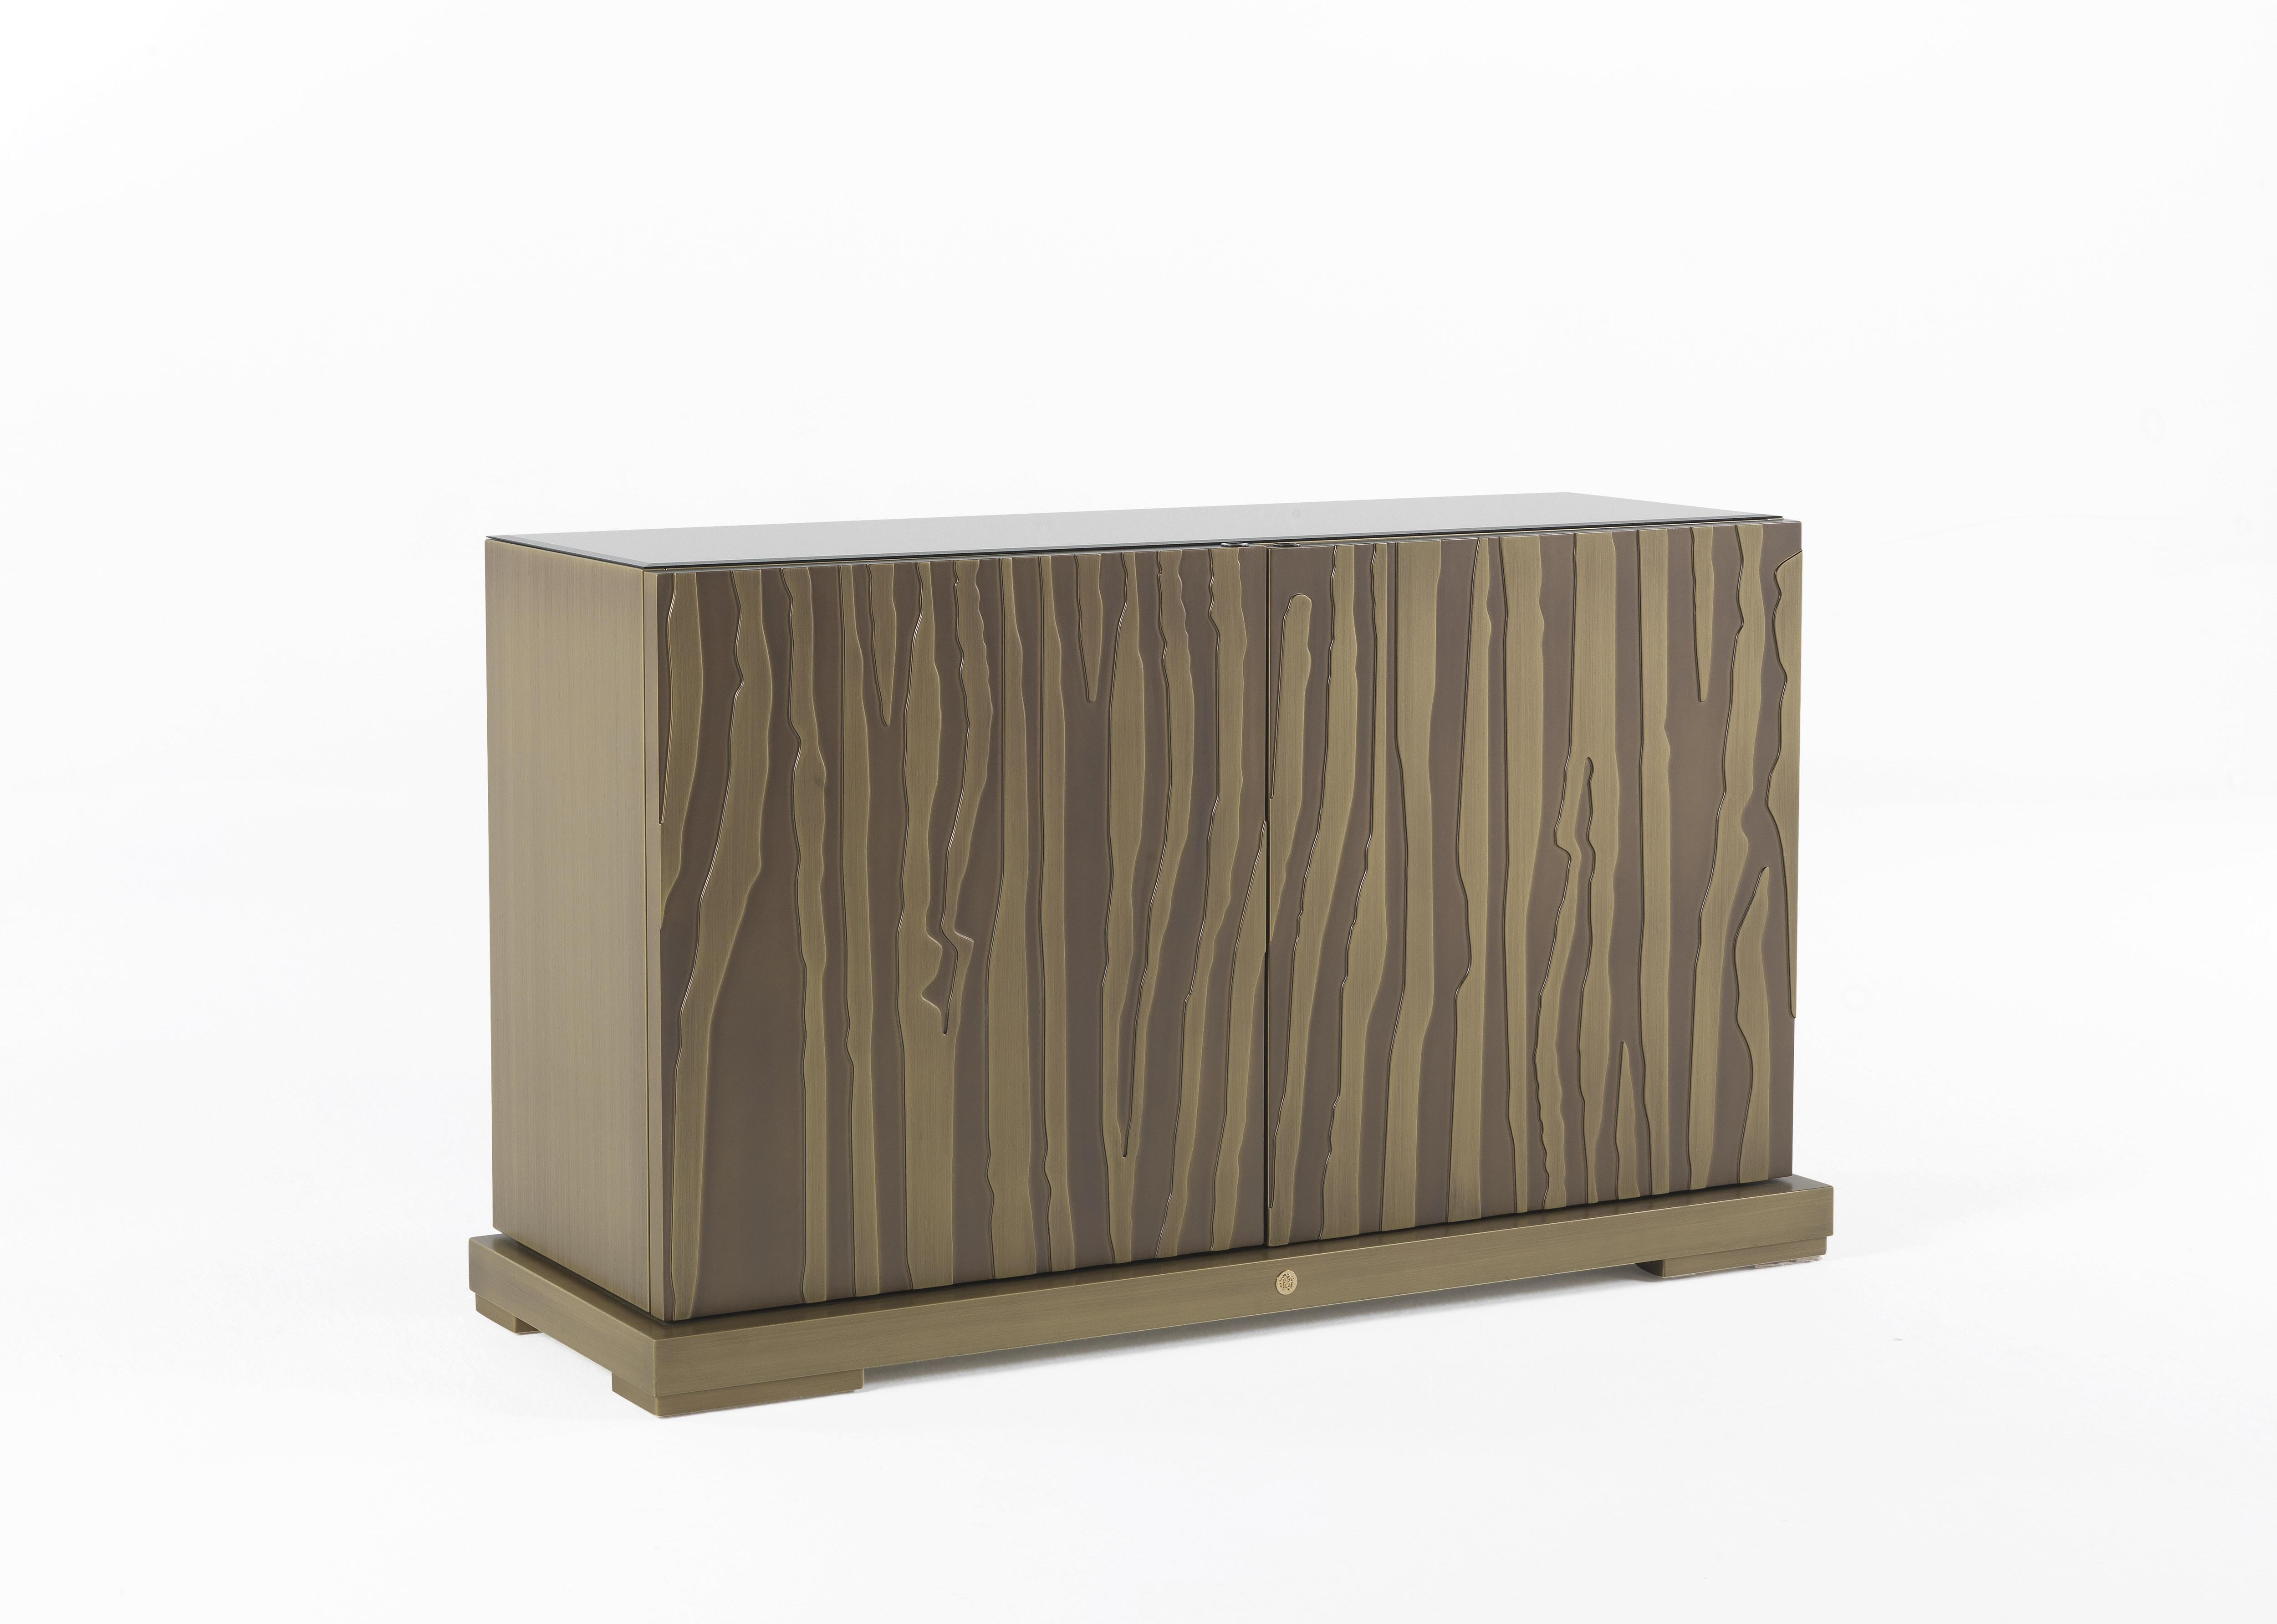 Sahara Madia with top in multi-layer wood covered with bevelled bronze mirror. Structure and engraved doors in multi-layer wood lacquered brushed bronze finishing. Metal feet brushed bronze finishing. Inside finishing in microfiber with bronze glass